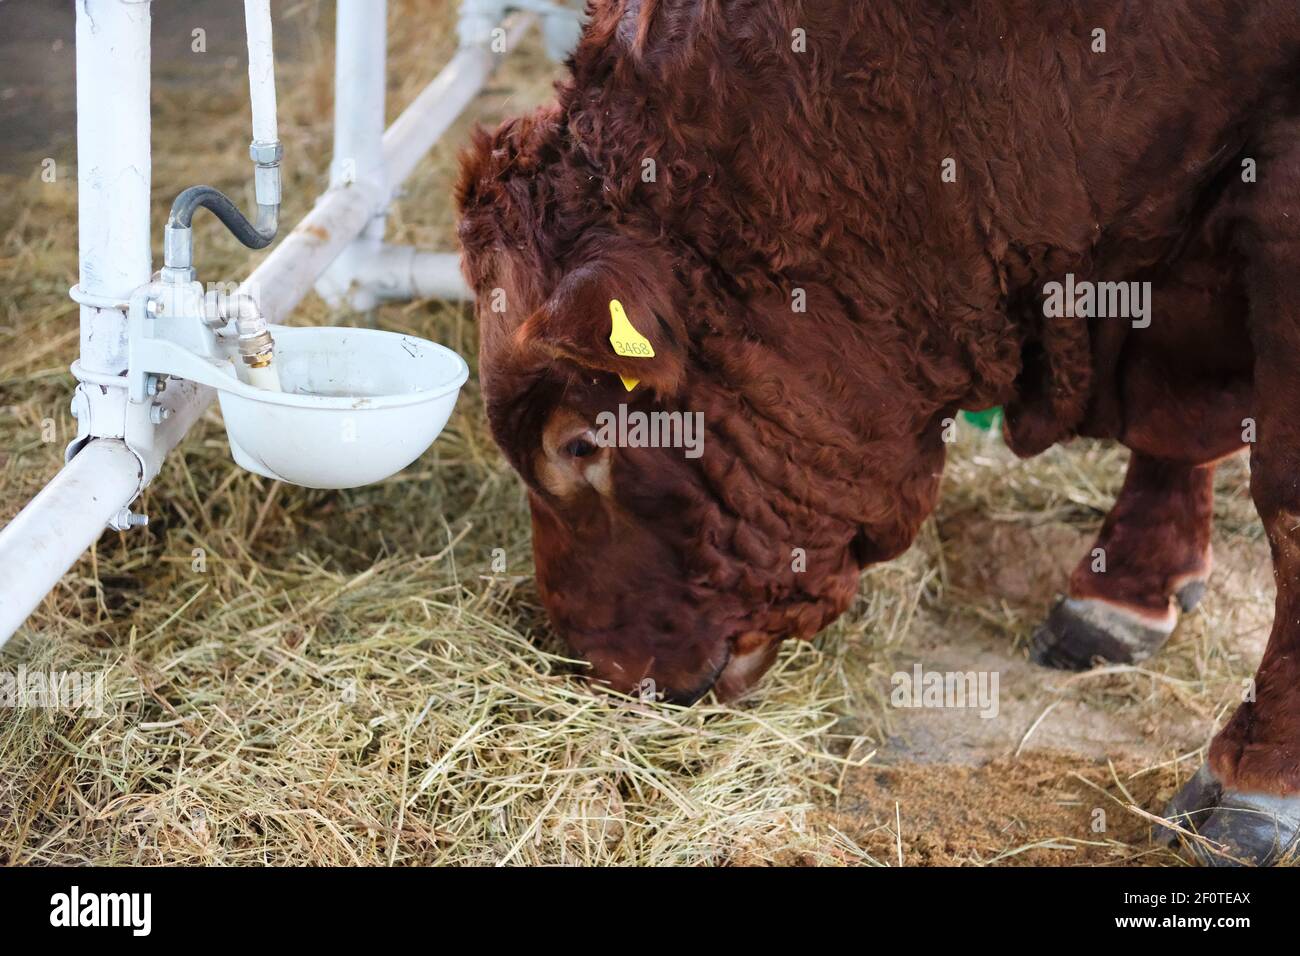 Brown bull eats hay on dairy farm. Concept of agriculture, farming and livestock. Stock Photo